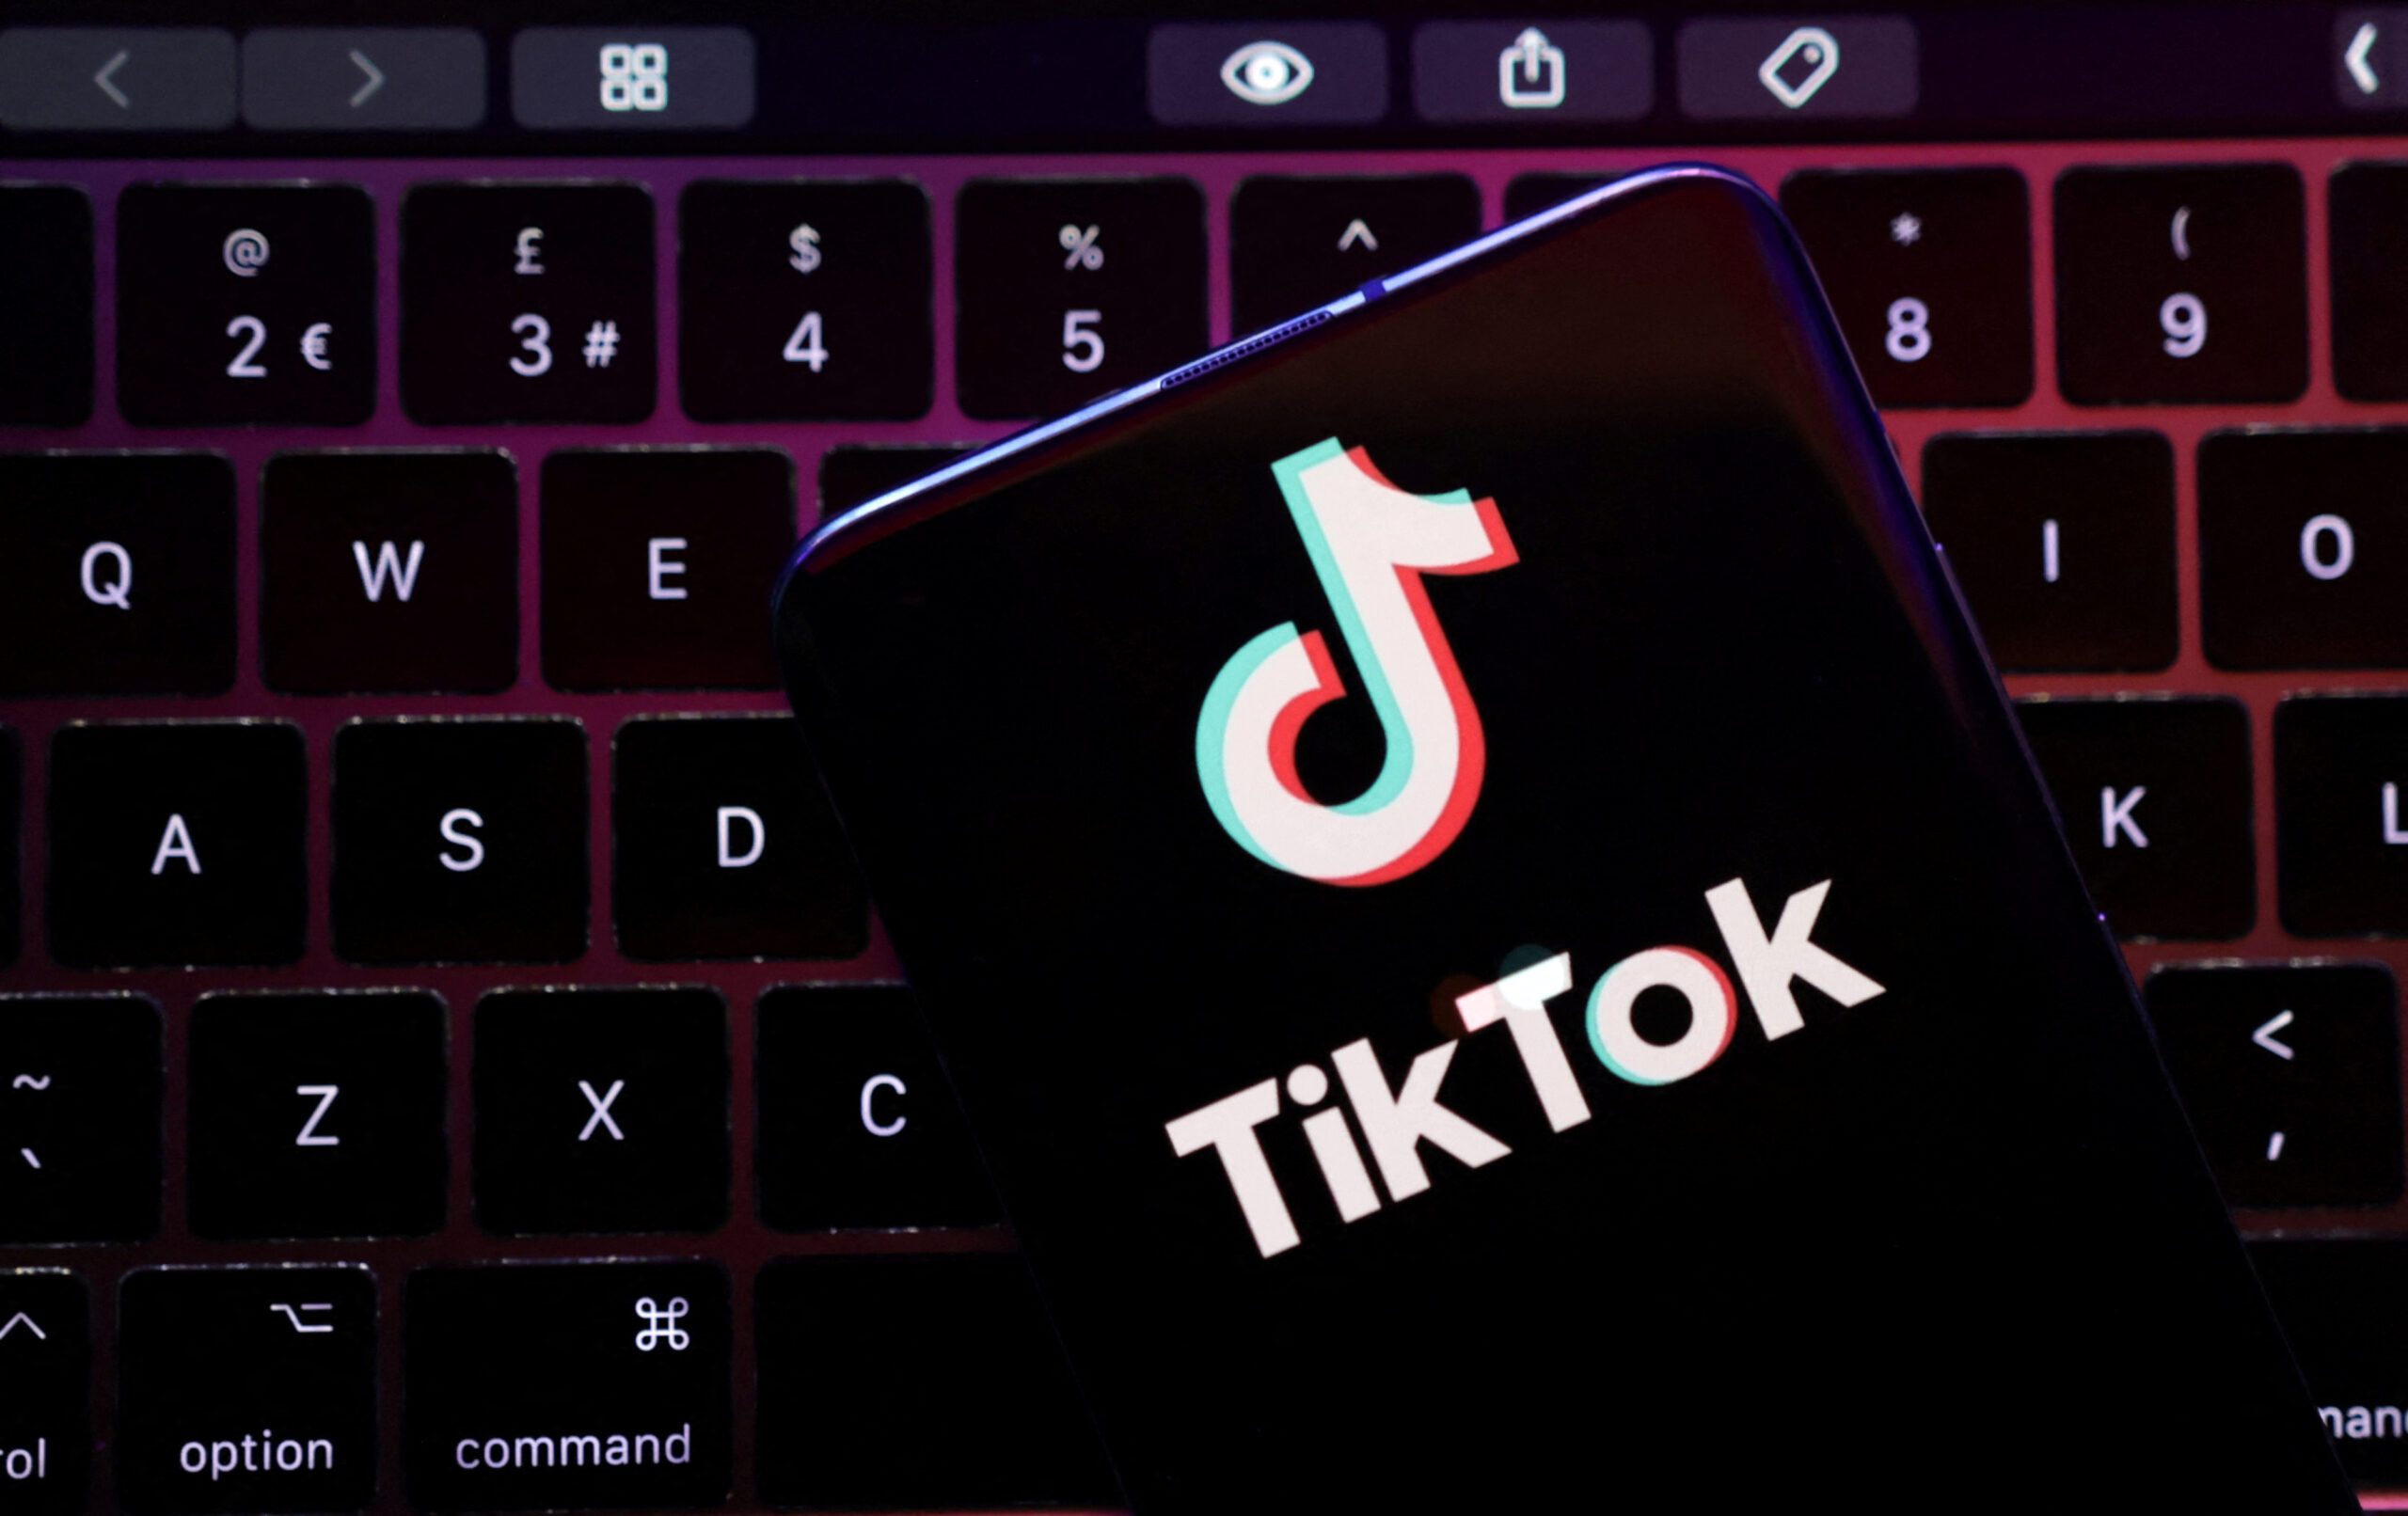 TikTok users migrate to rival platforms as US ban threat looms